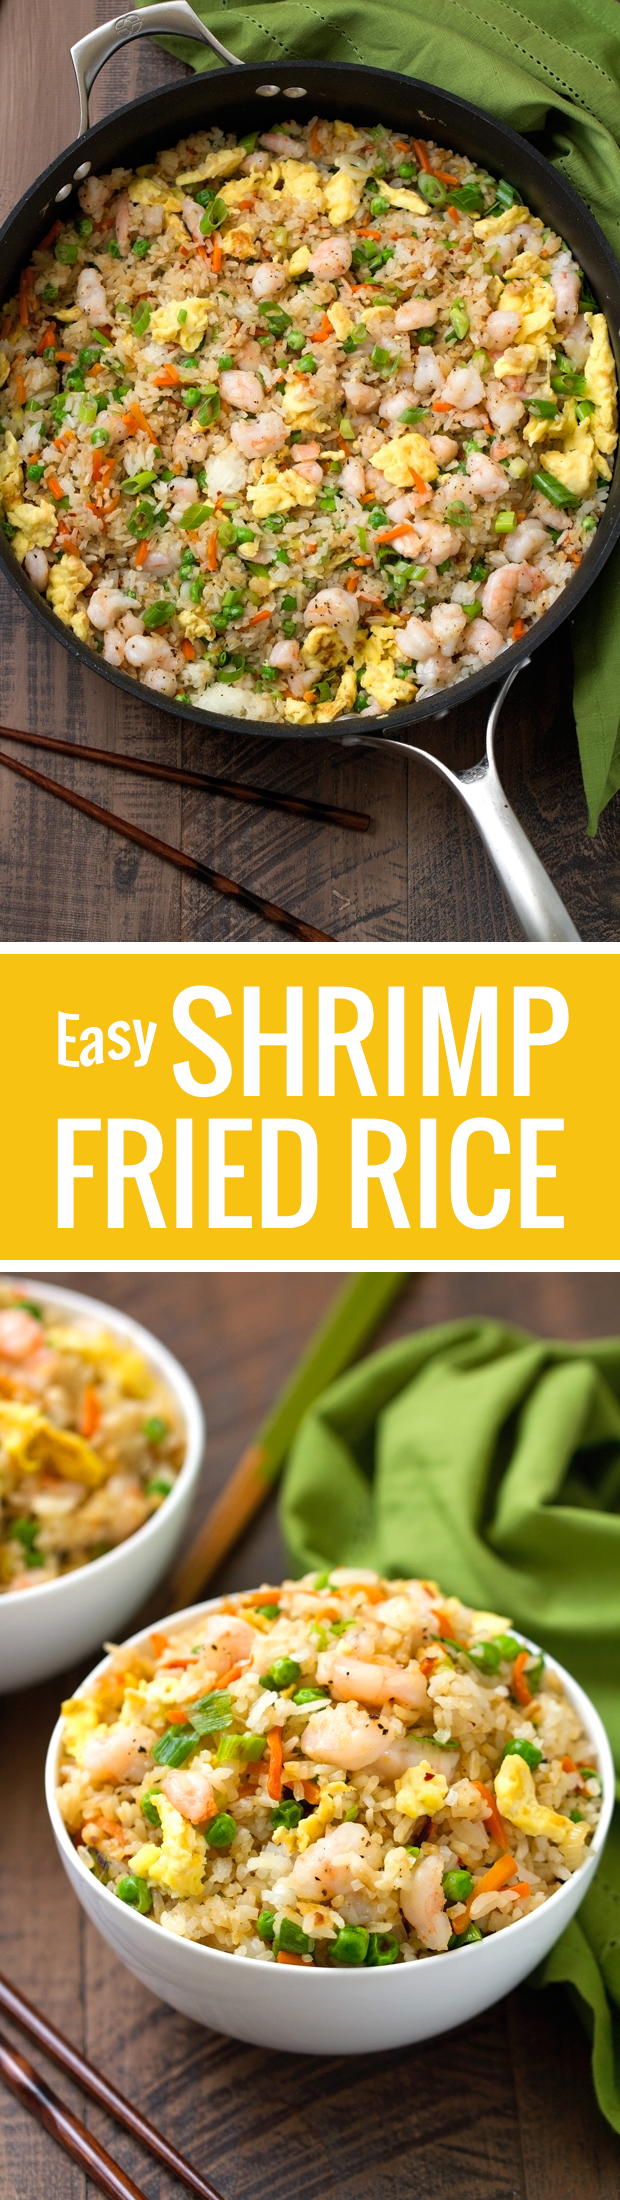 Easy Shrimp Fried Rice - 15 minutes and so flavorful that you'll never order TAKEOUT ever again! #friedrice #shrimpfriedrice #quickfriedrice | Littlespicejar.com